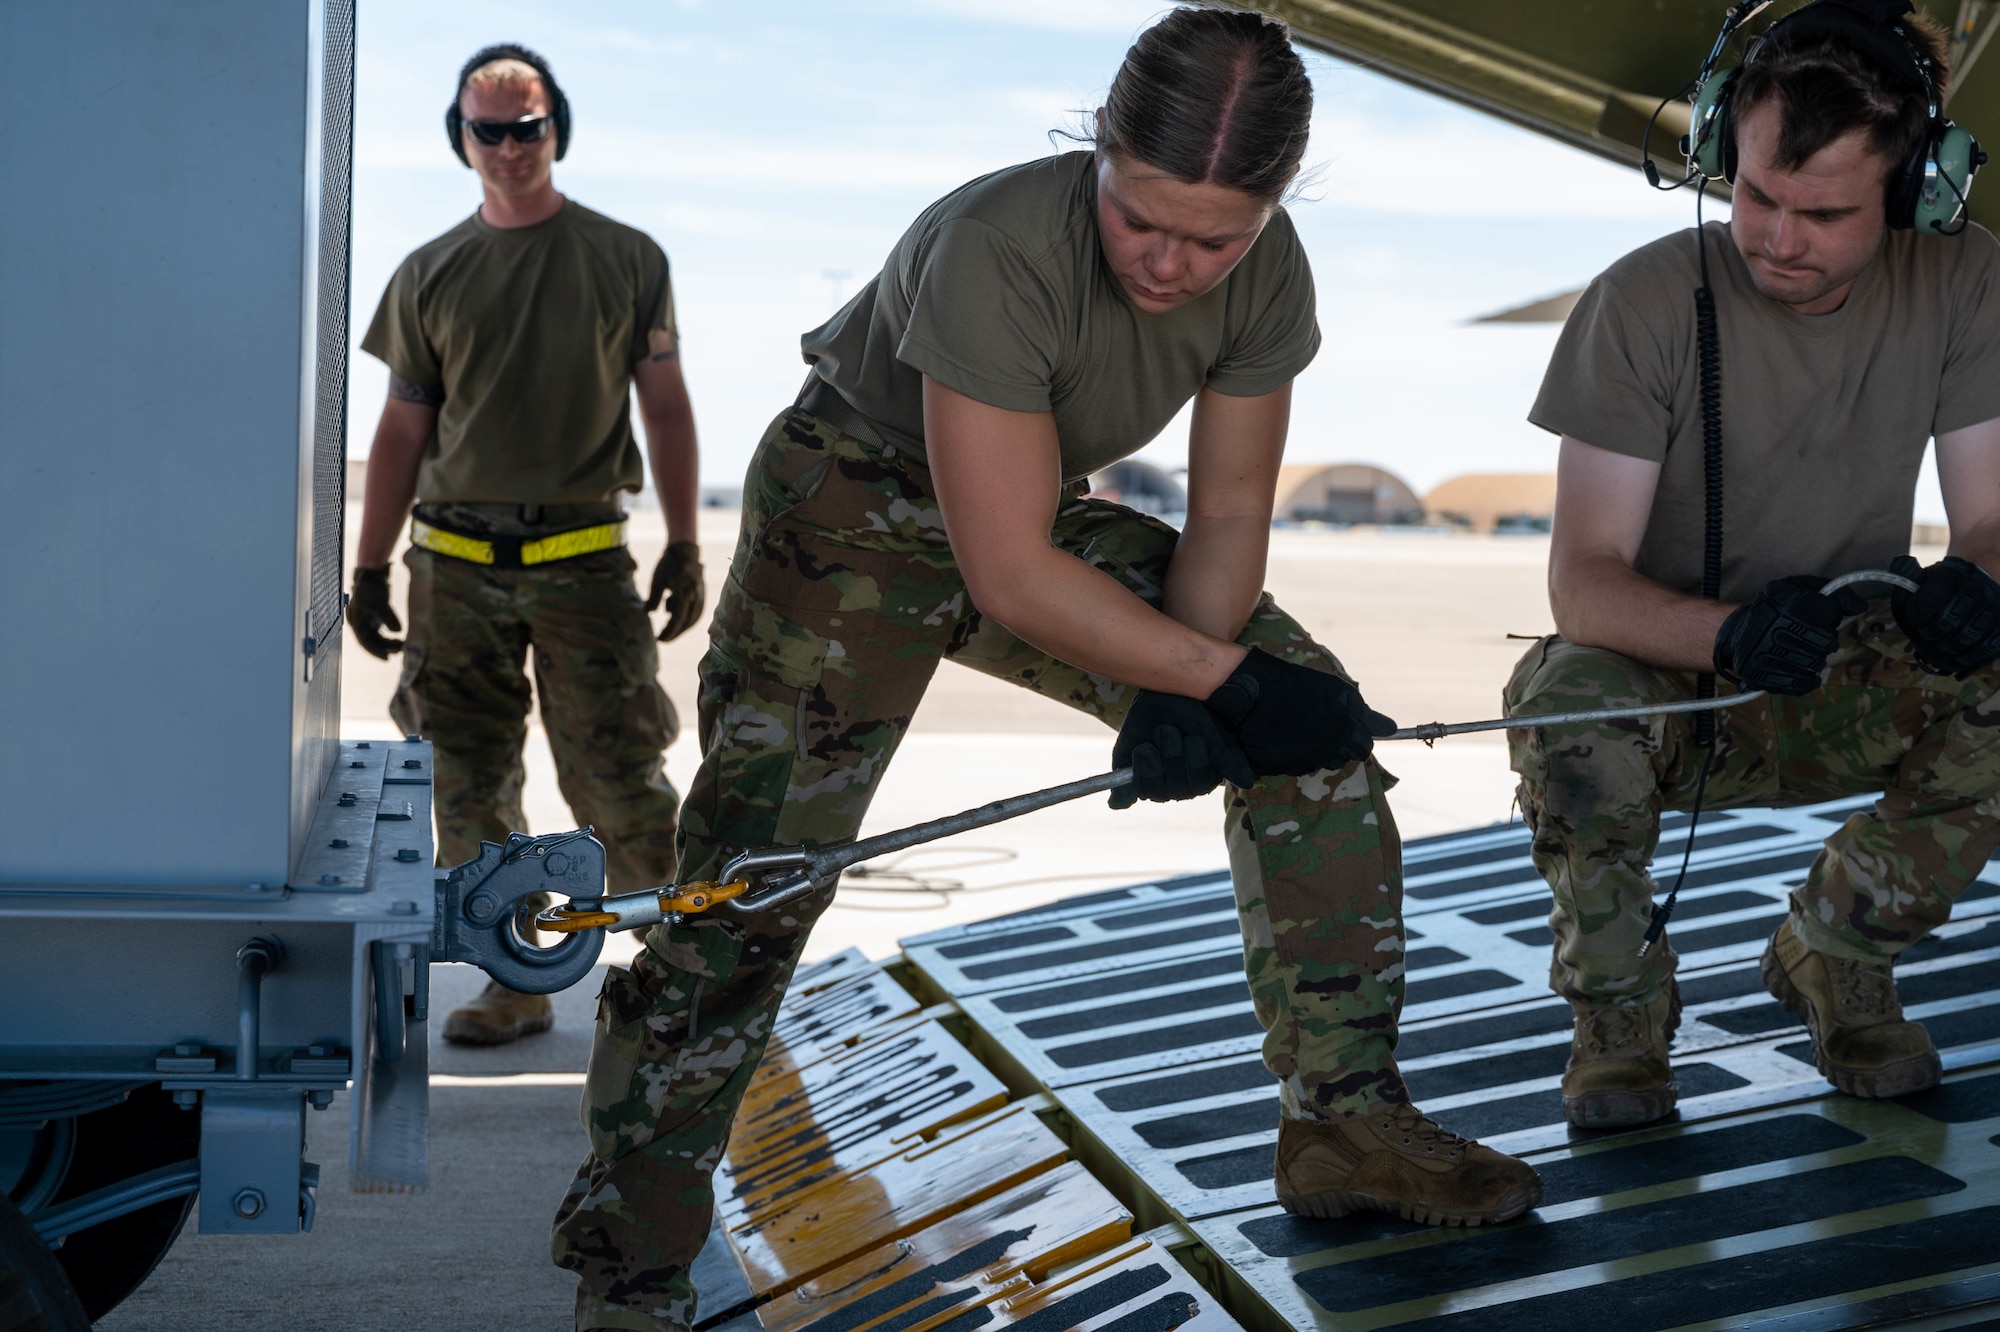 Airman 1st Class Rebecca Reimer, center, 9th Airlift Squadron student loadmaster, and Staff Sgt. John Dittess, right, 9th AS loadmaster, attach a winch to aircraft ground equipment before loading it onto a Dover Air Force Base C-5M Super Galaxy during a Major Command Service Tail Trainer, at Holloman AFB, June 8, 2021. Loadmasters from the 9th AS coordinated cargo with Airmen from Air Education and Training Command’s 49th Wing and Air Force Materiel Command’s 635th Materiel Maintenance Group to complete the 10-day MSTT. Over the course of the training, Airmen loaded and unloaded 320,085 pounds of cargo, including palletized cargo, AGE, a fuel truck and a K-loader. (U.S. Air Force photo by Senior Airman Faith Schaefer)